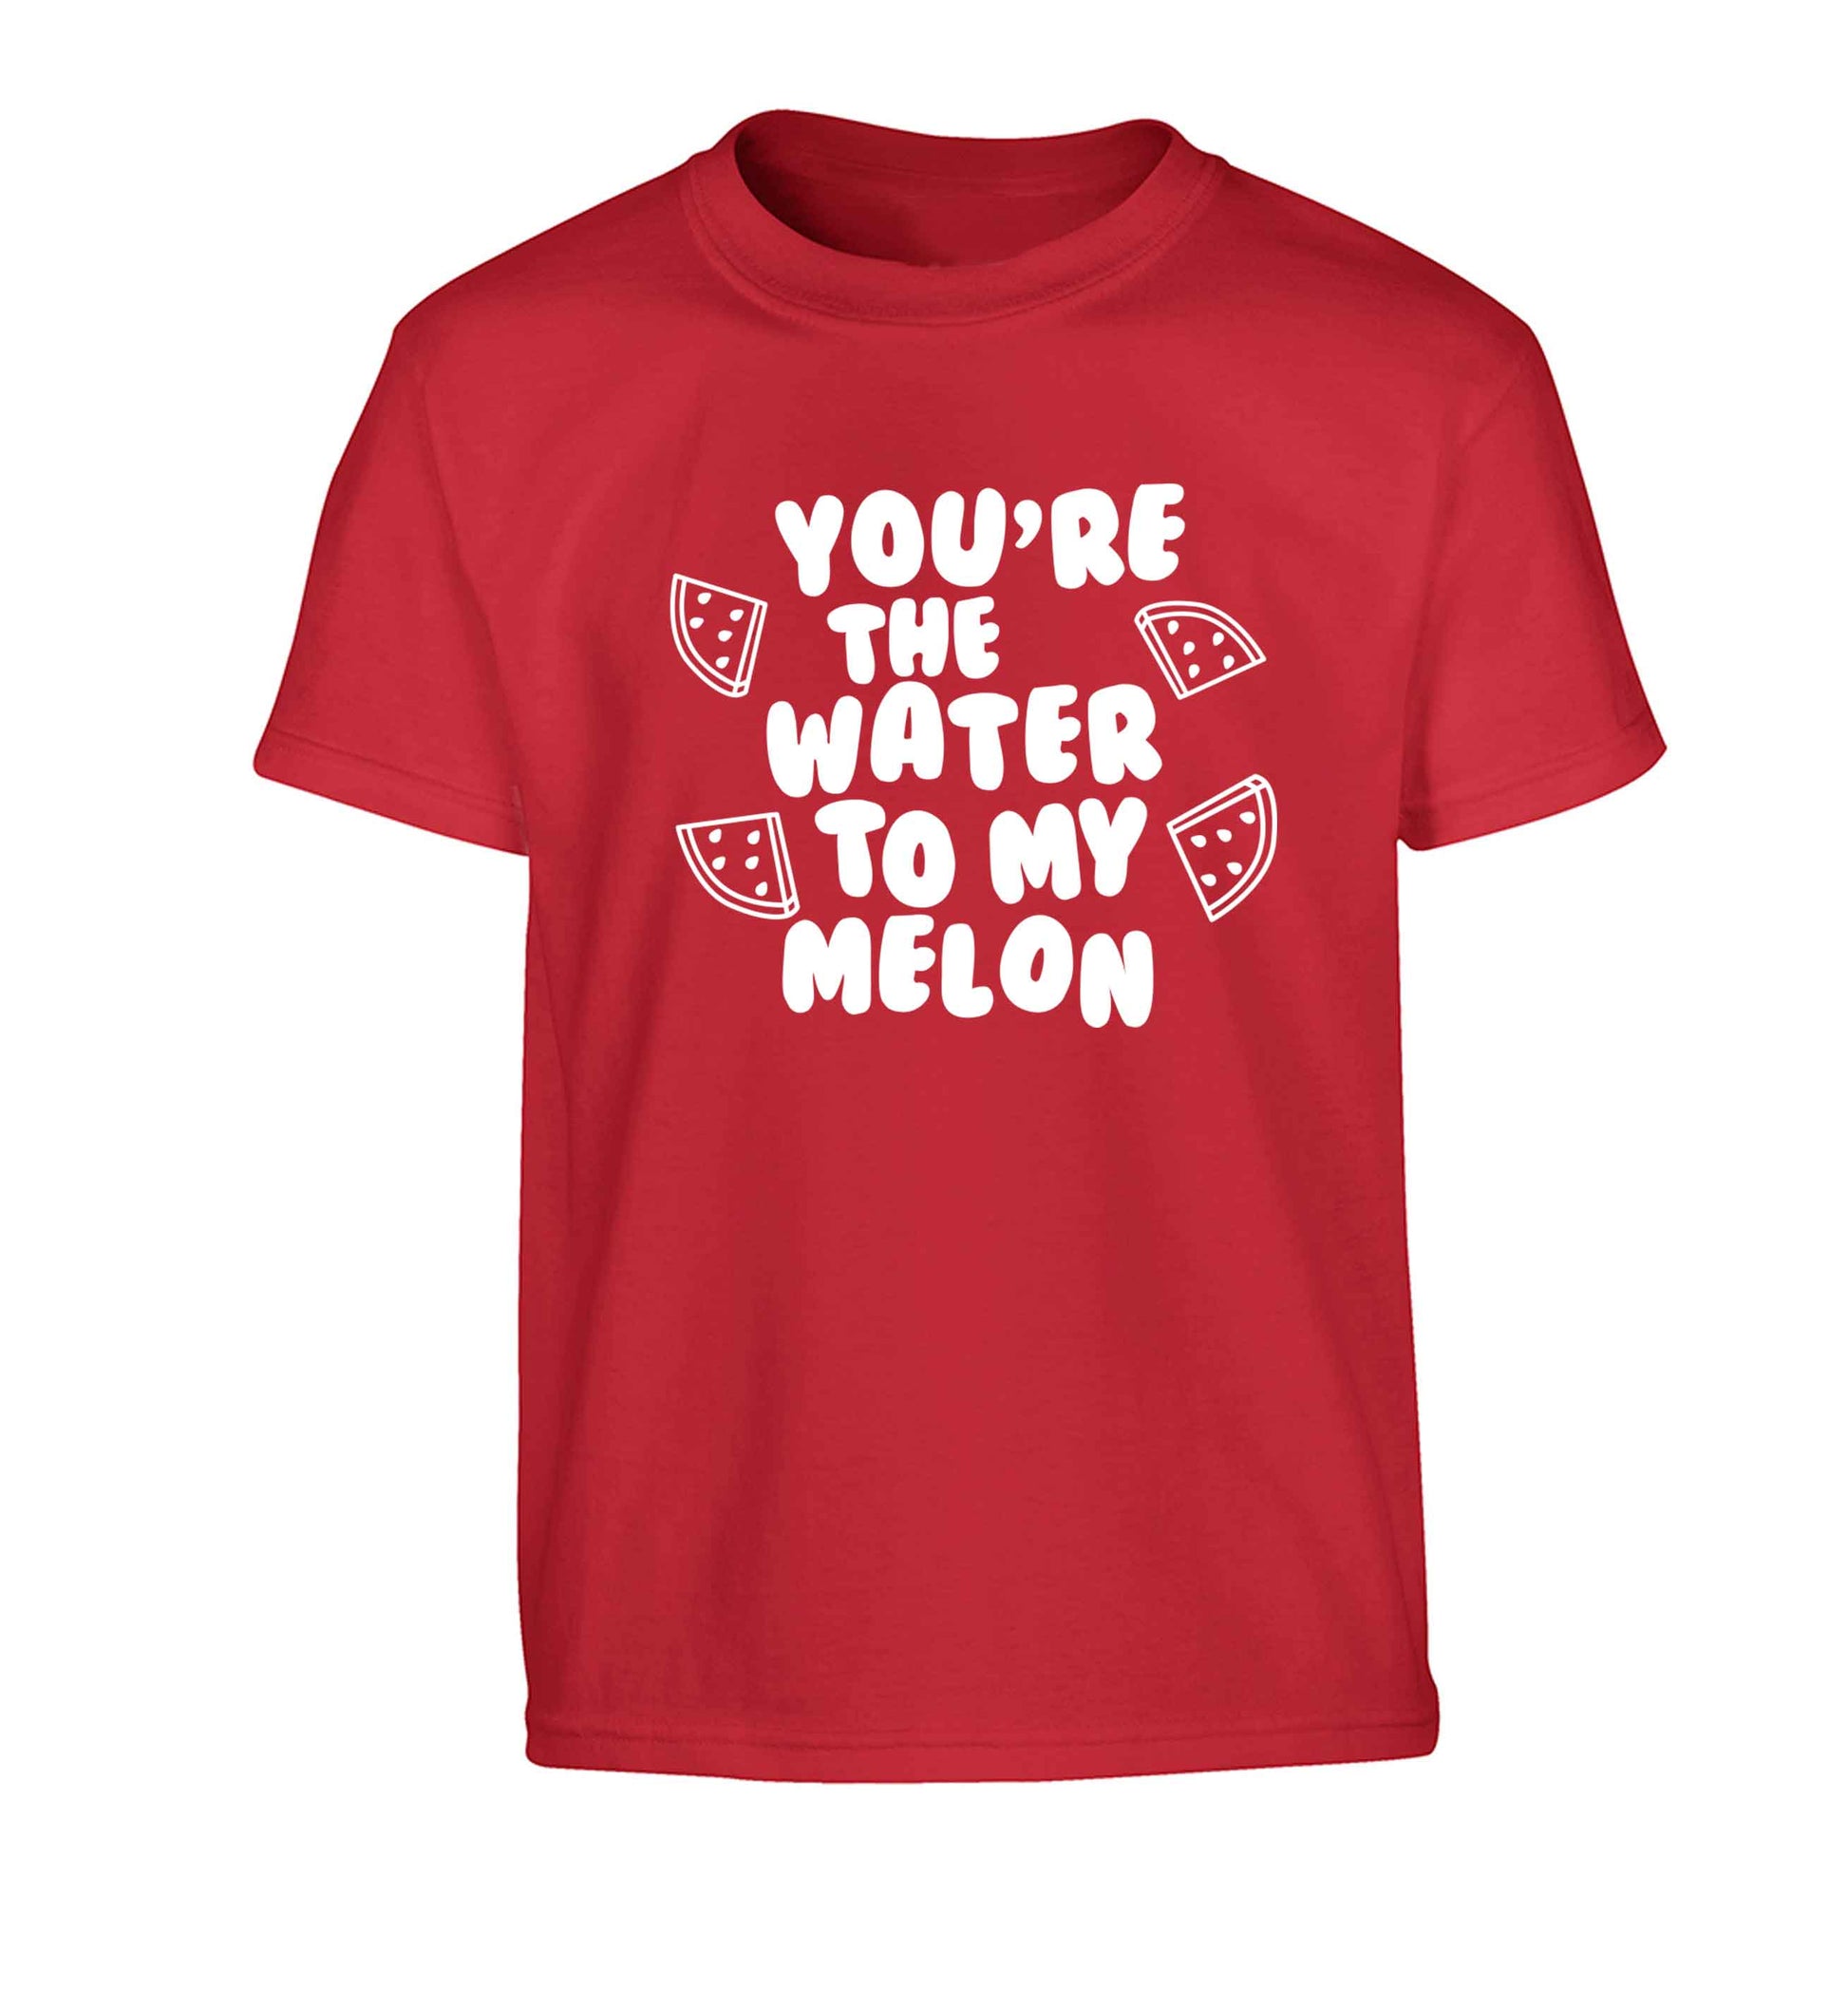 You're the water to my melon Children's red Tshirt 12-13 Years